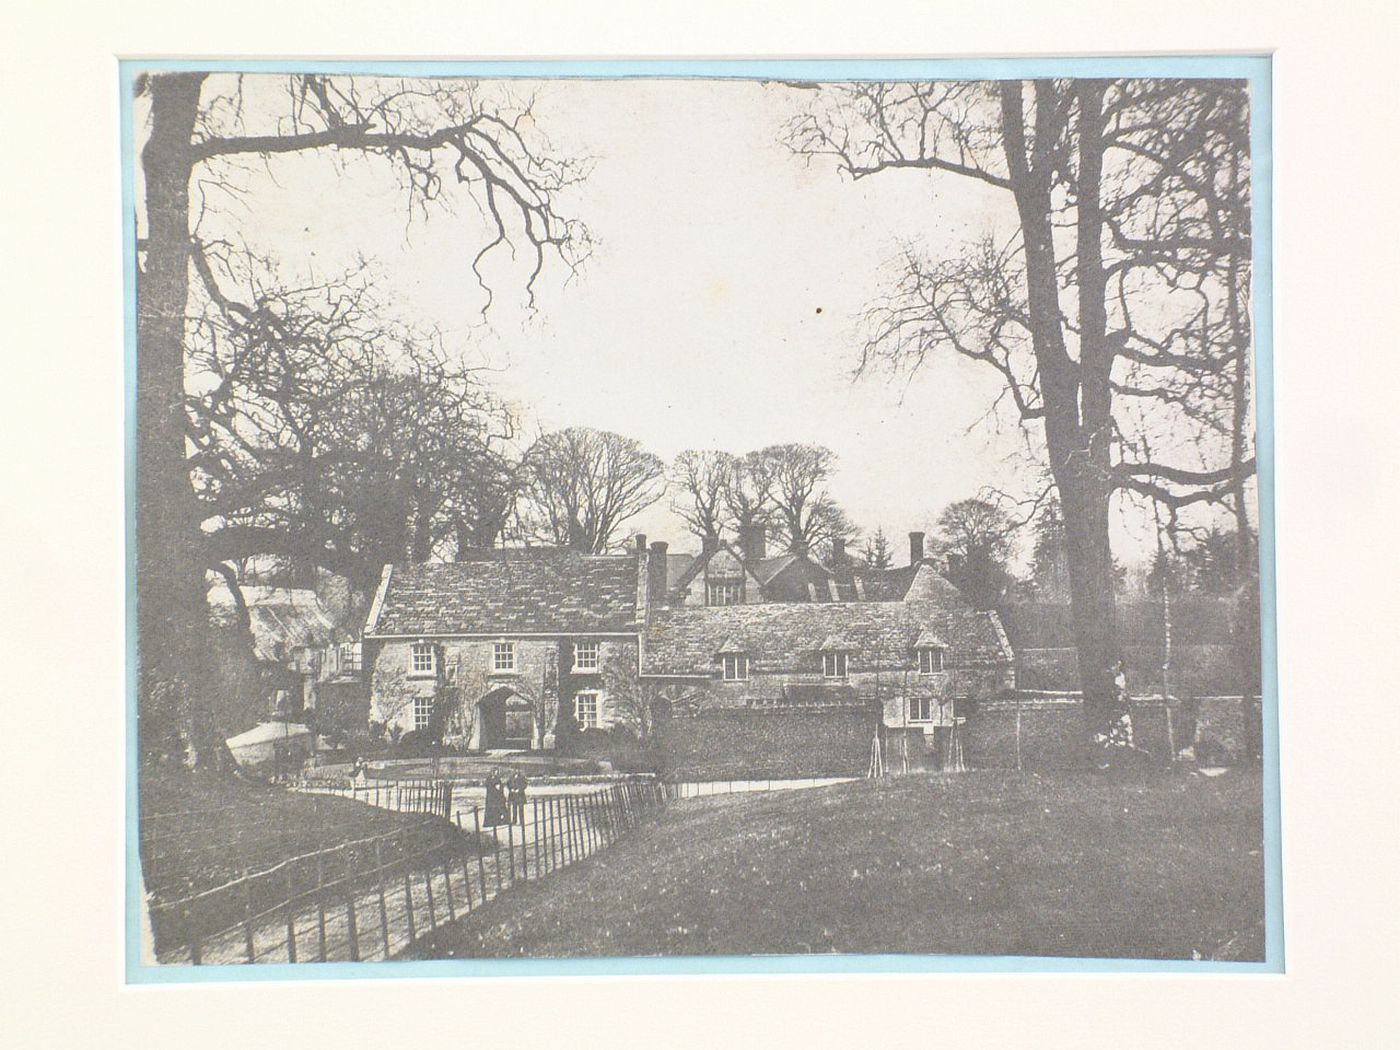 View of houses in a village, three figures in the road, England